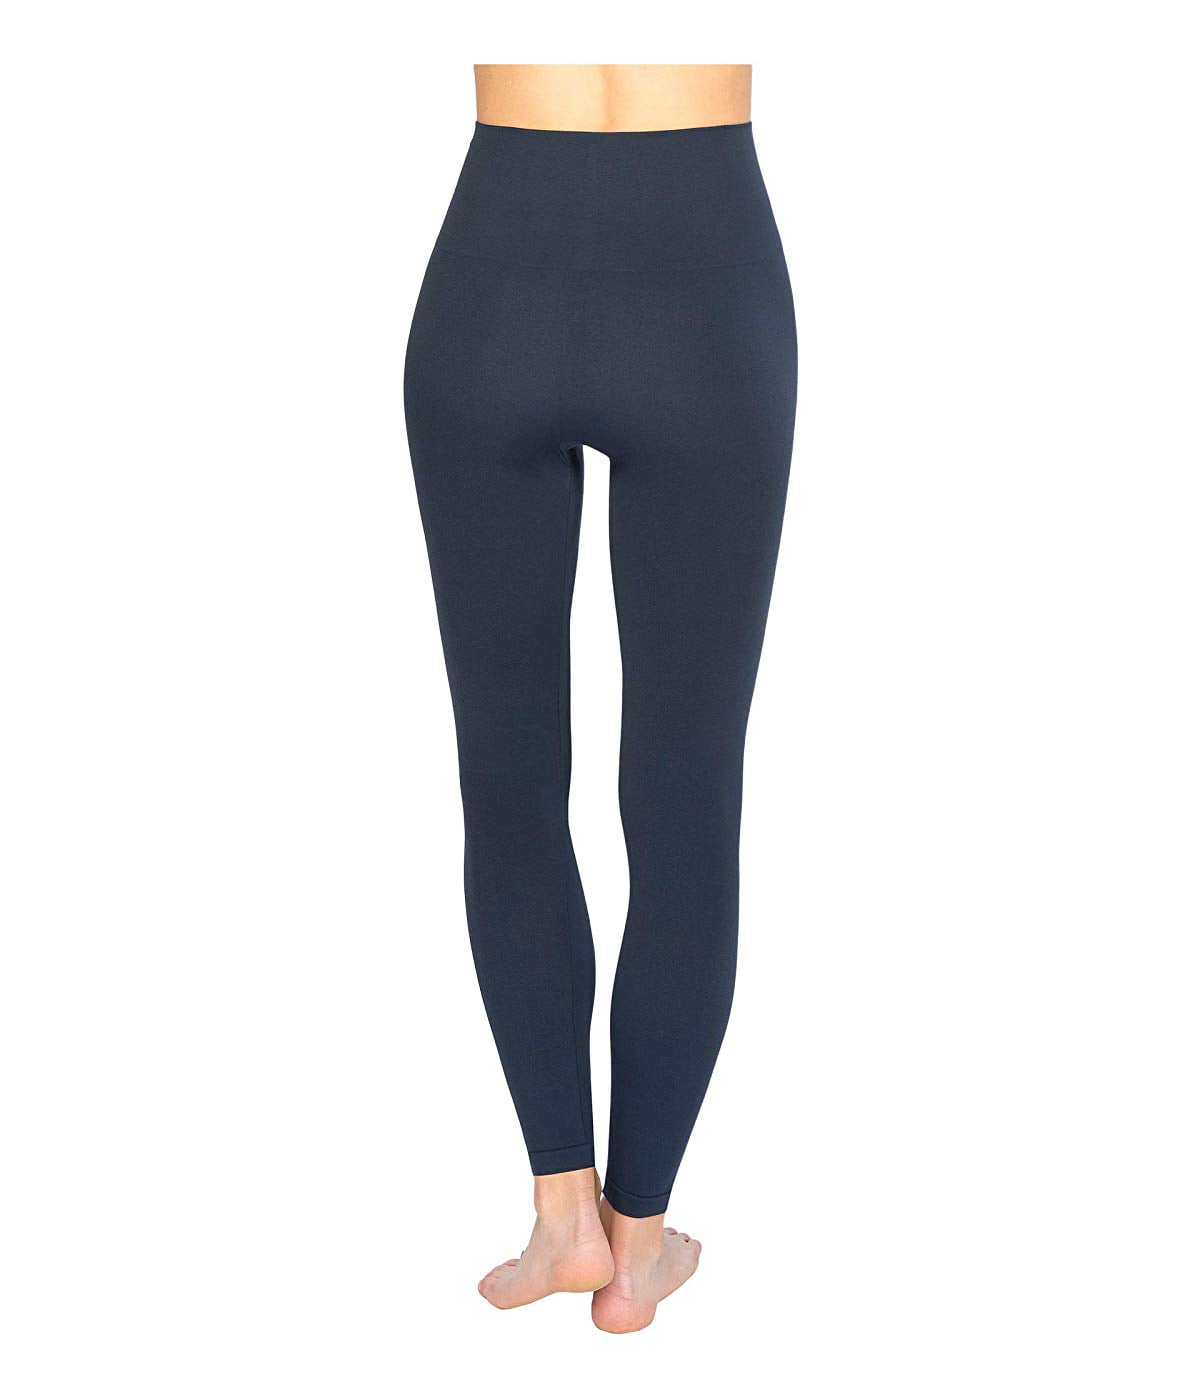 NEW Spanx Look At Me Now Seamless Moto Leggings NAVY BLUE Women's Size Small  2-4